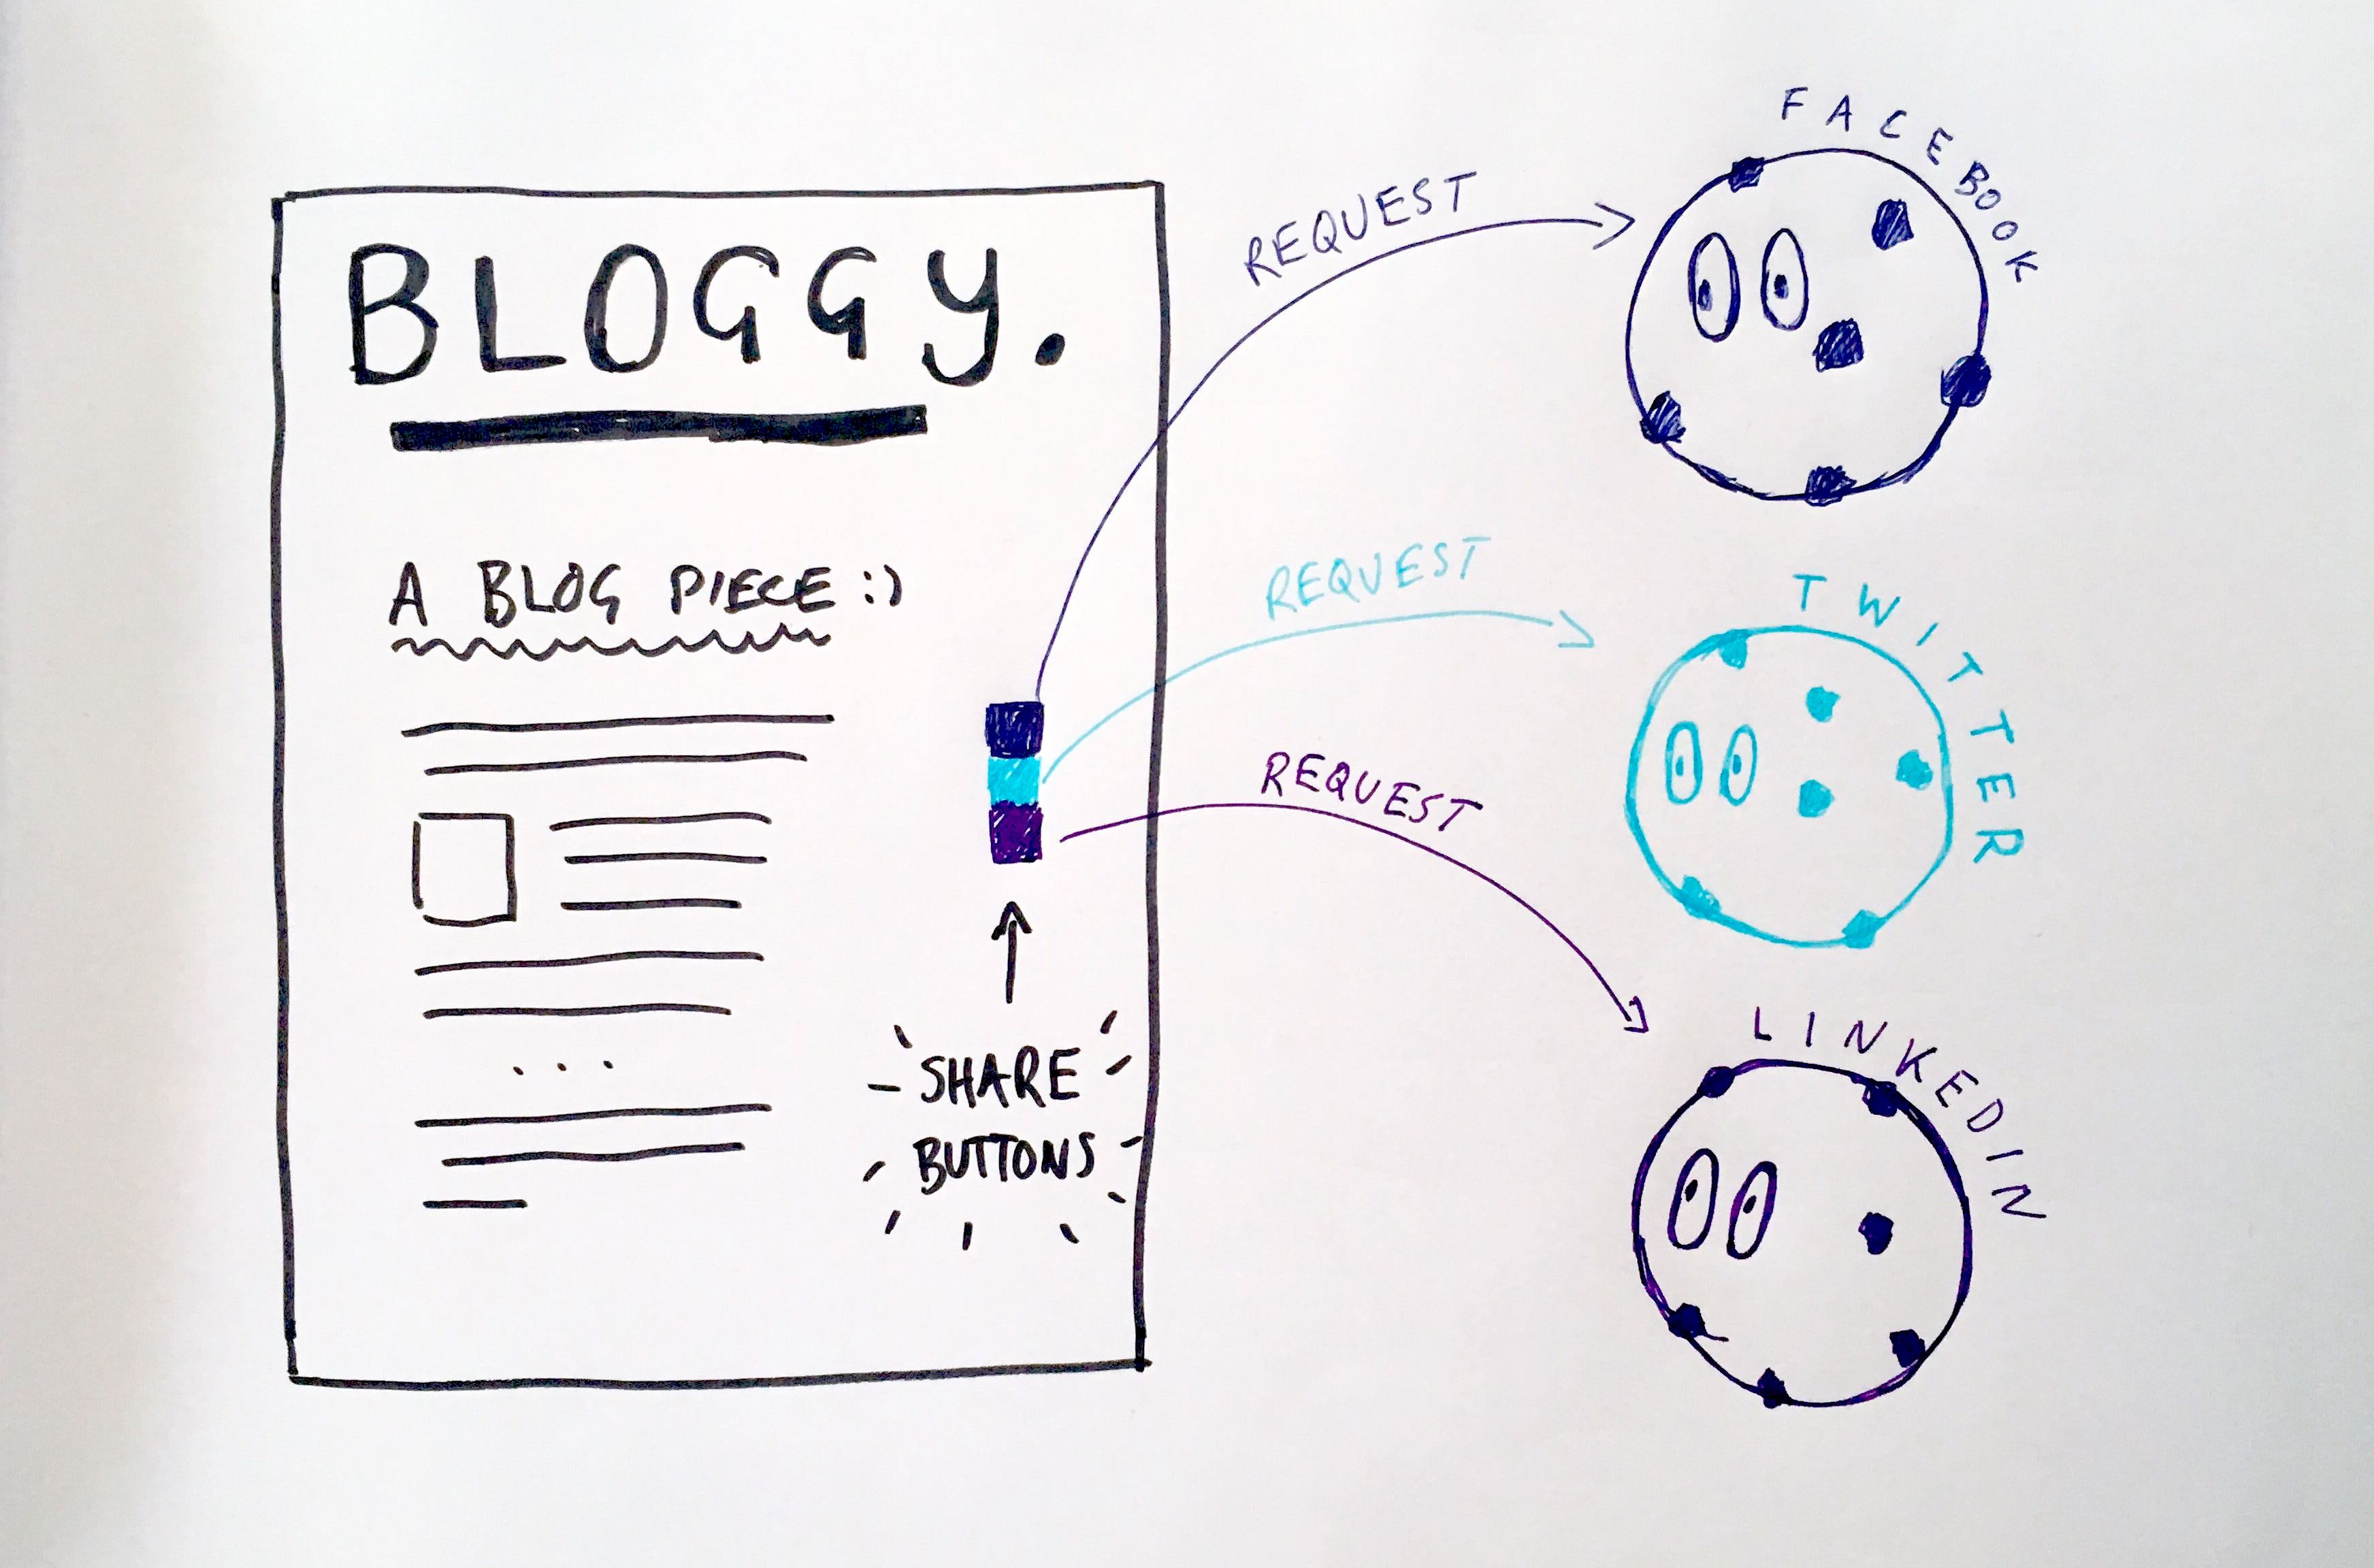 diagram of how a blog site makes requests to social media sites